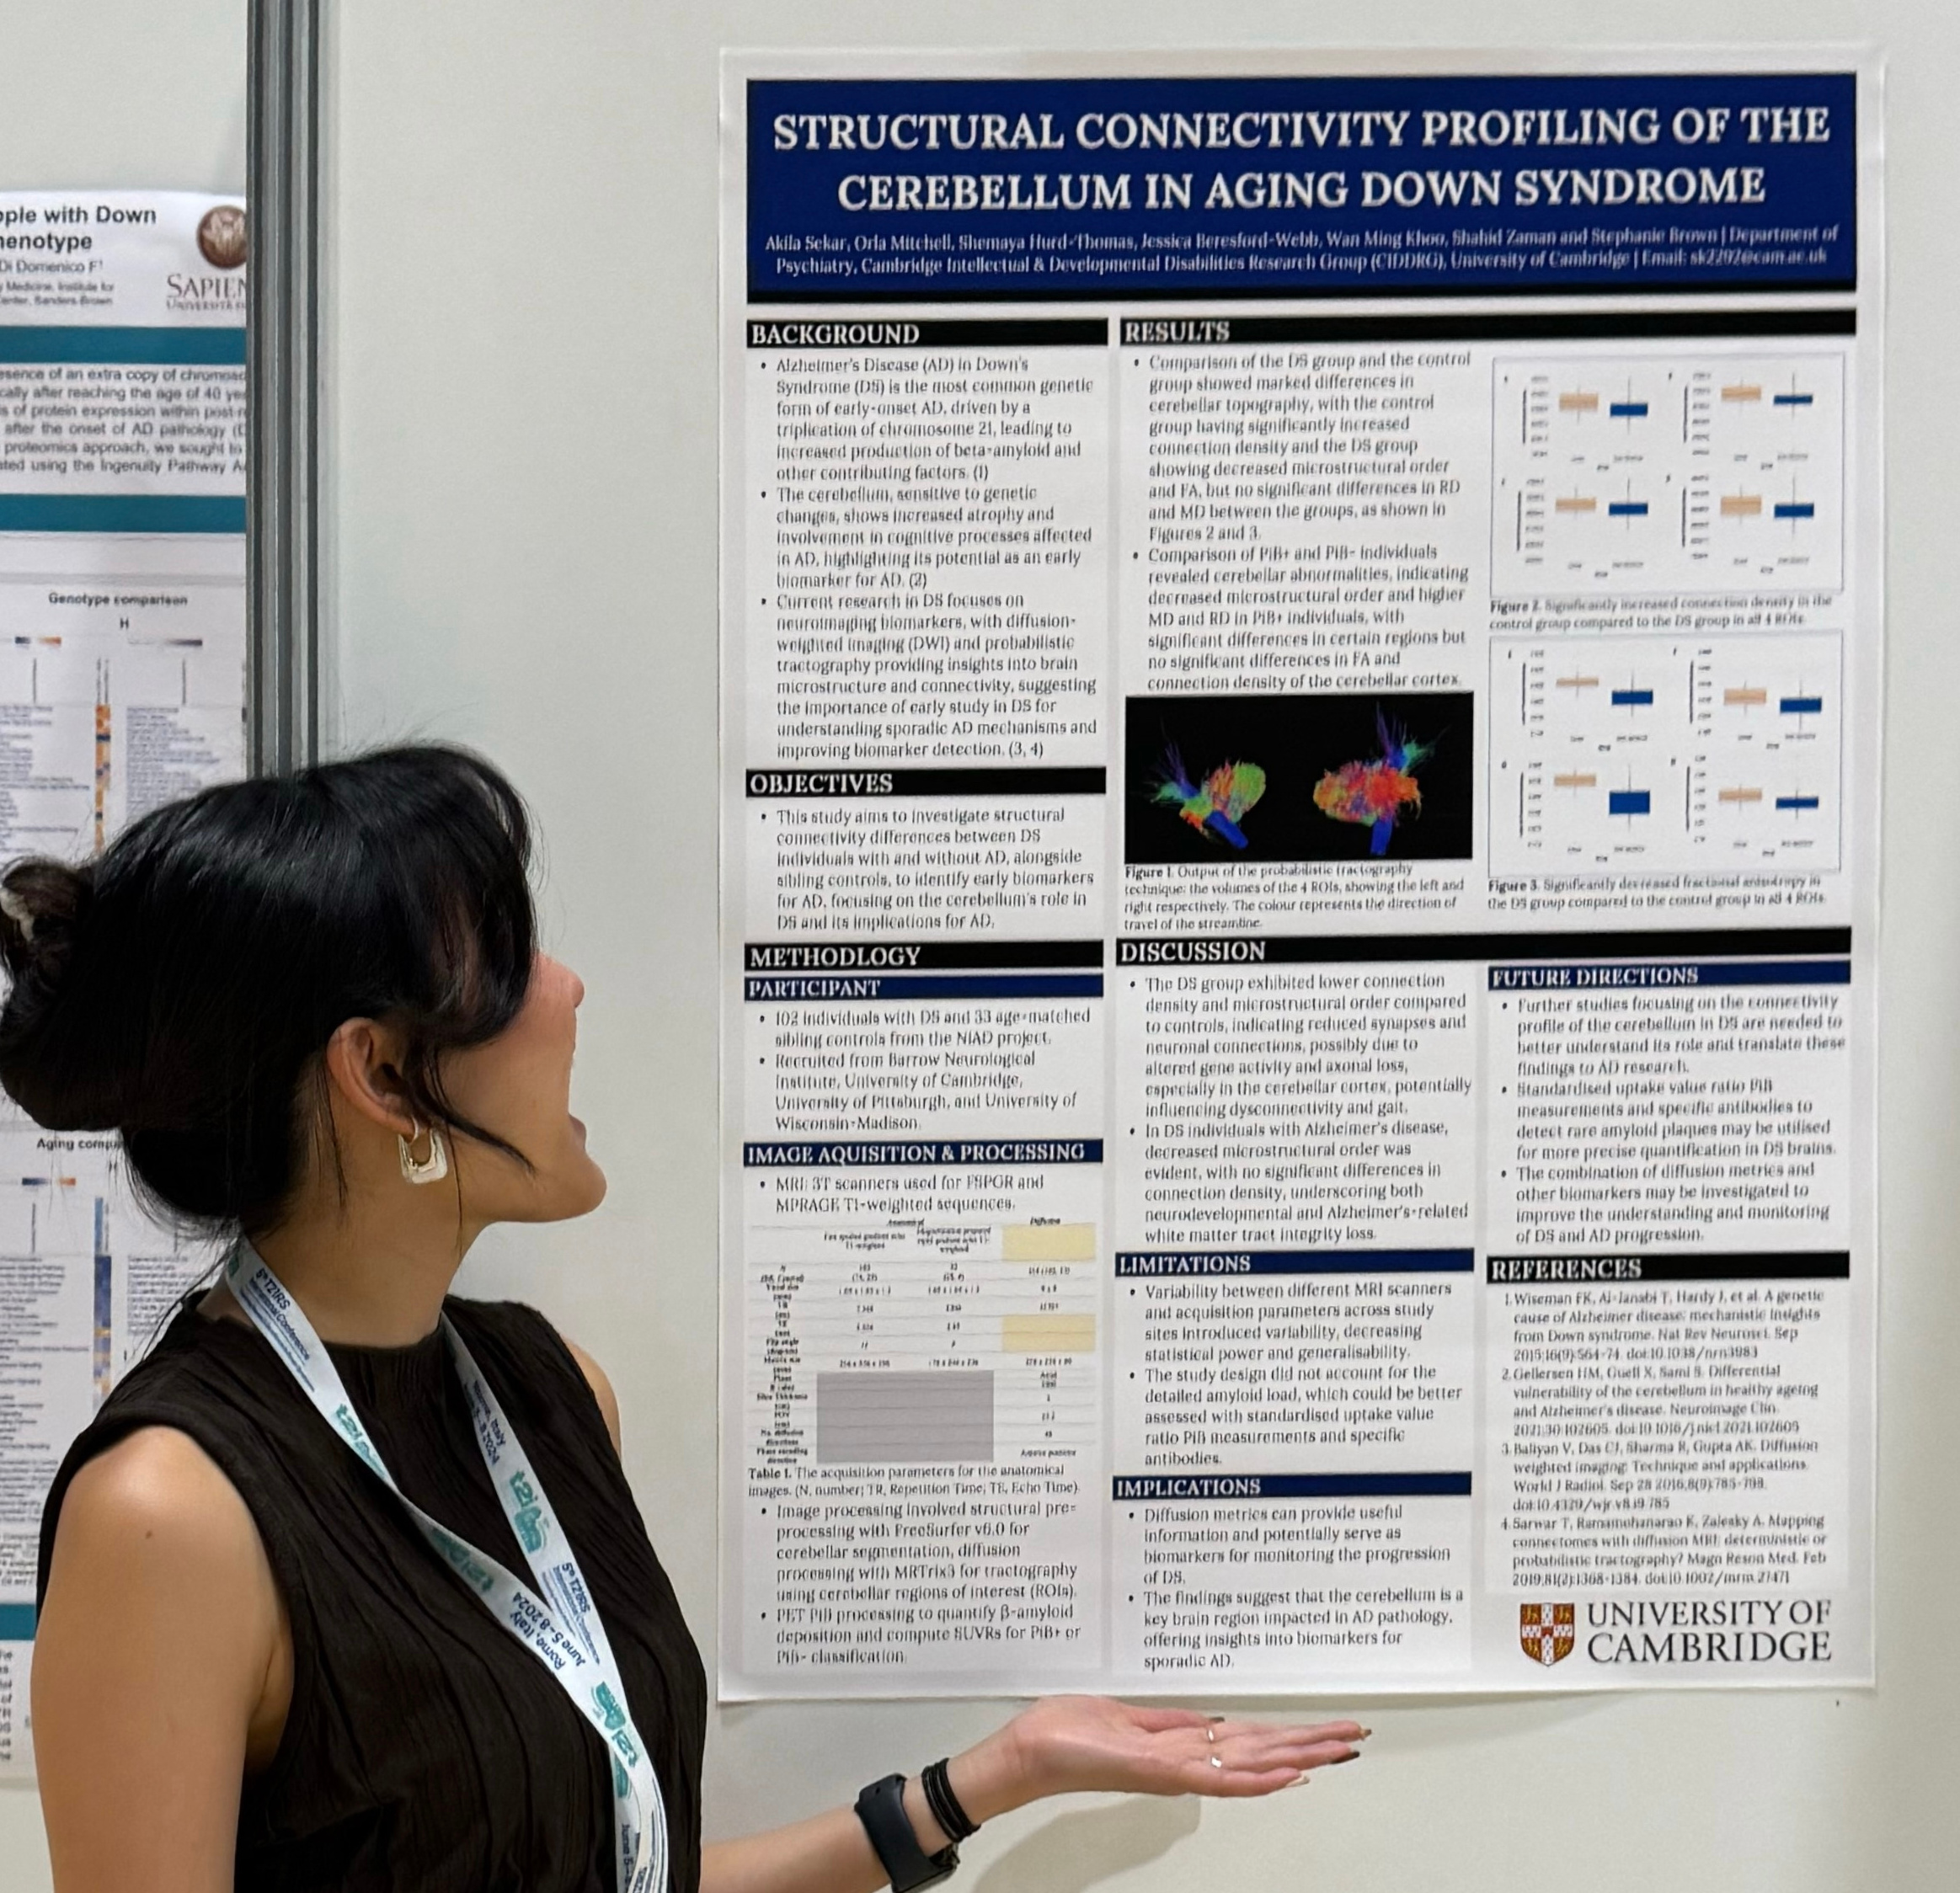 Sarah stands in front of her research poster entitled Structural connectivity profiling of the cerebellum in aging Down syndrome